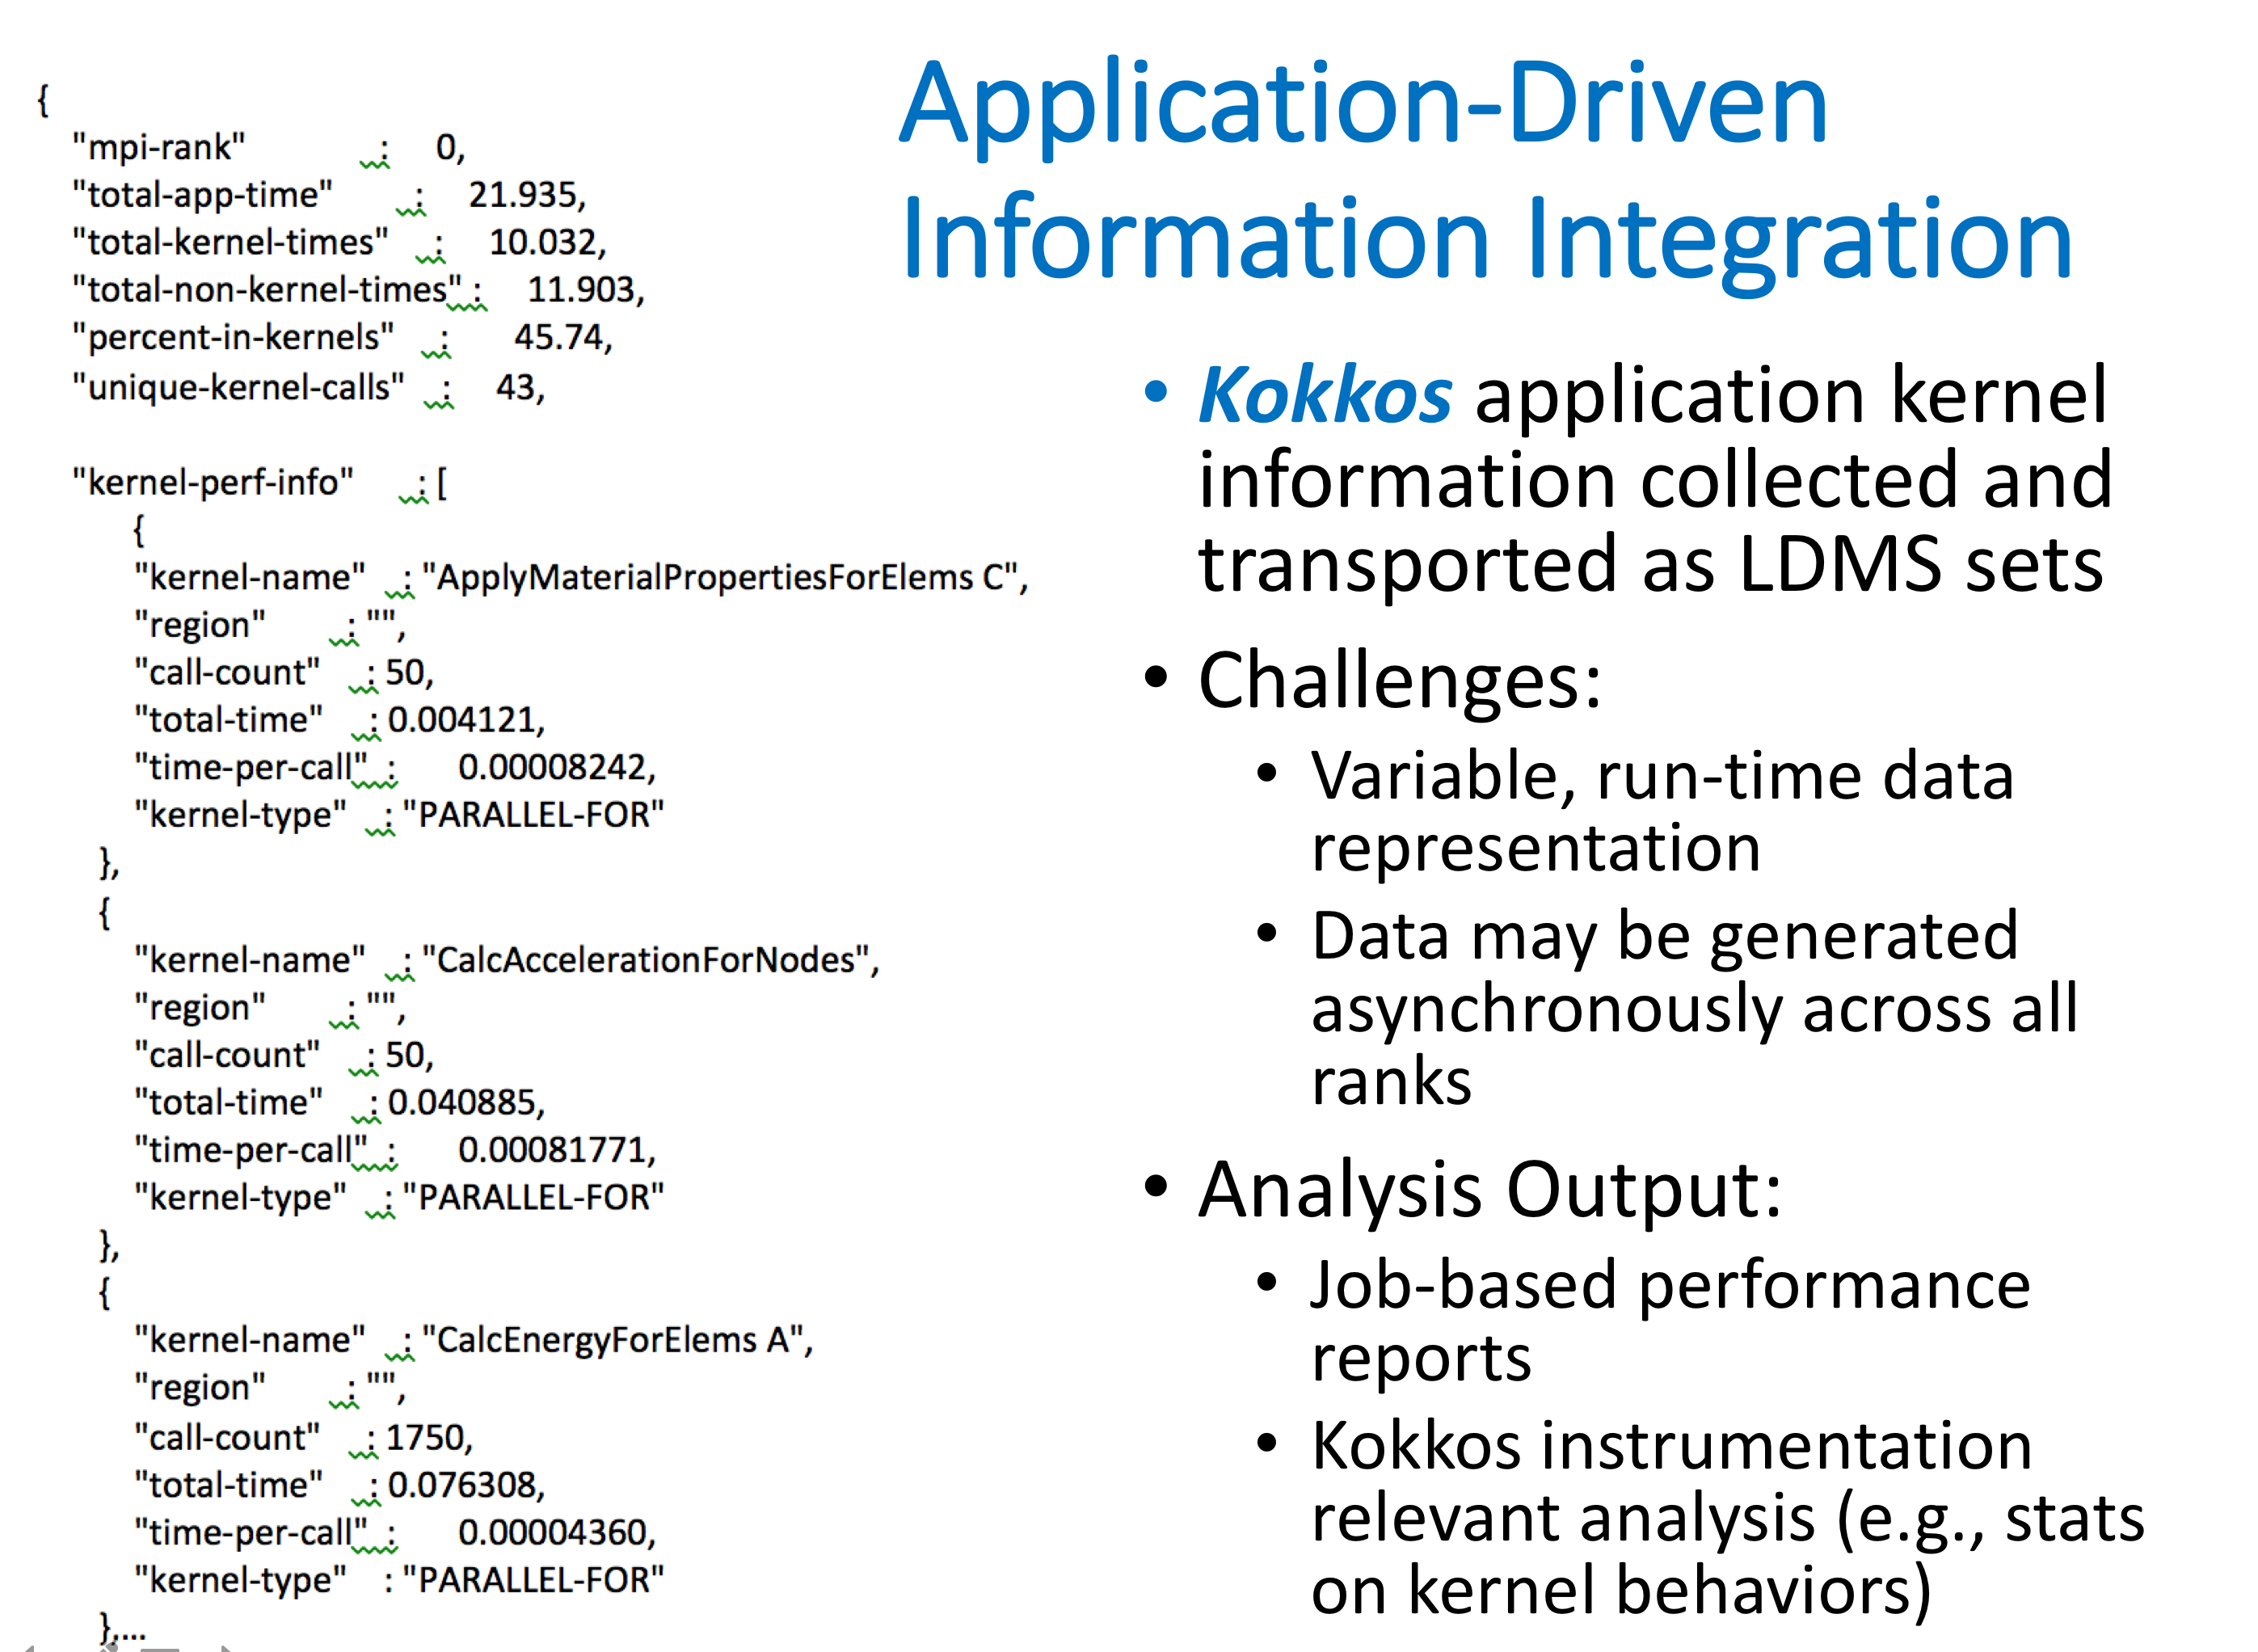 Application-Driven Information